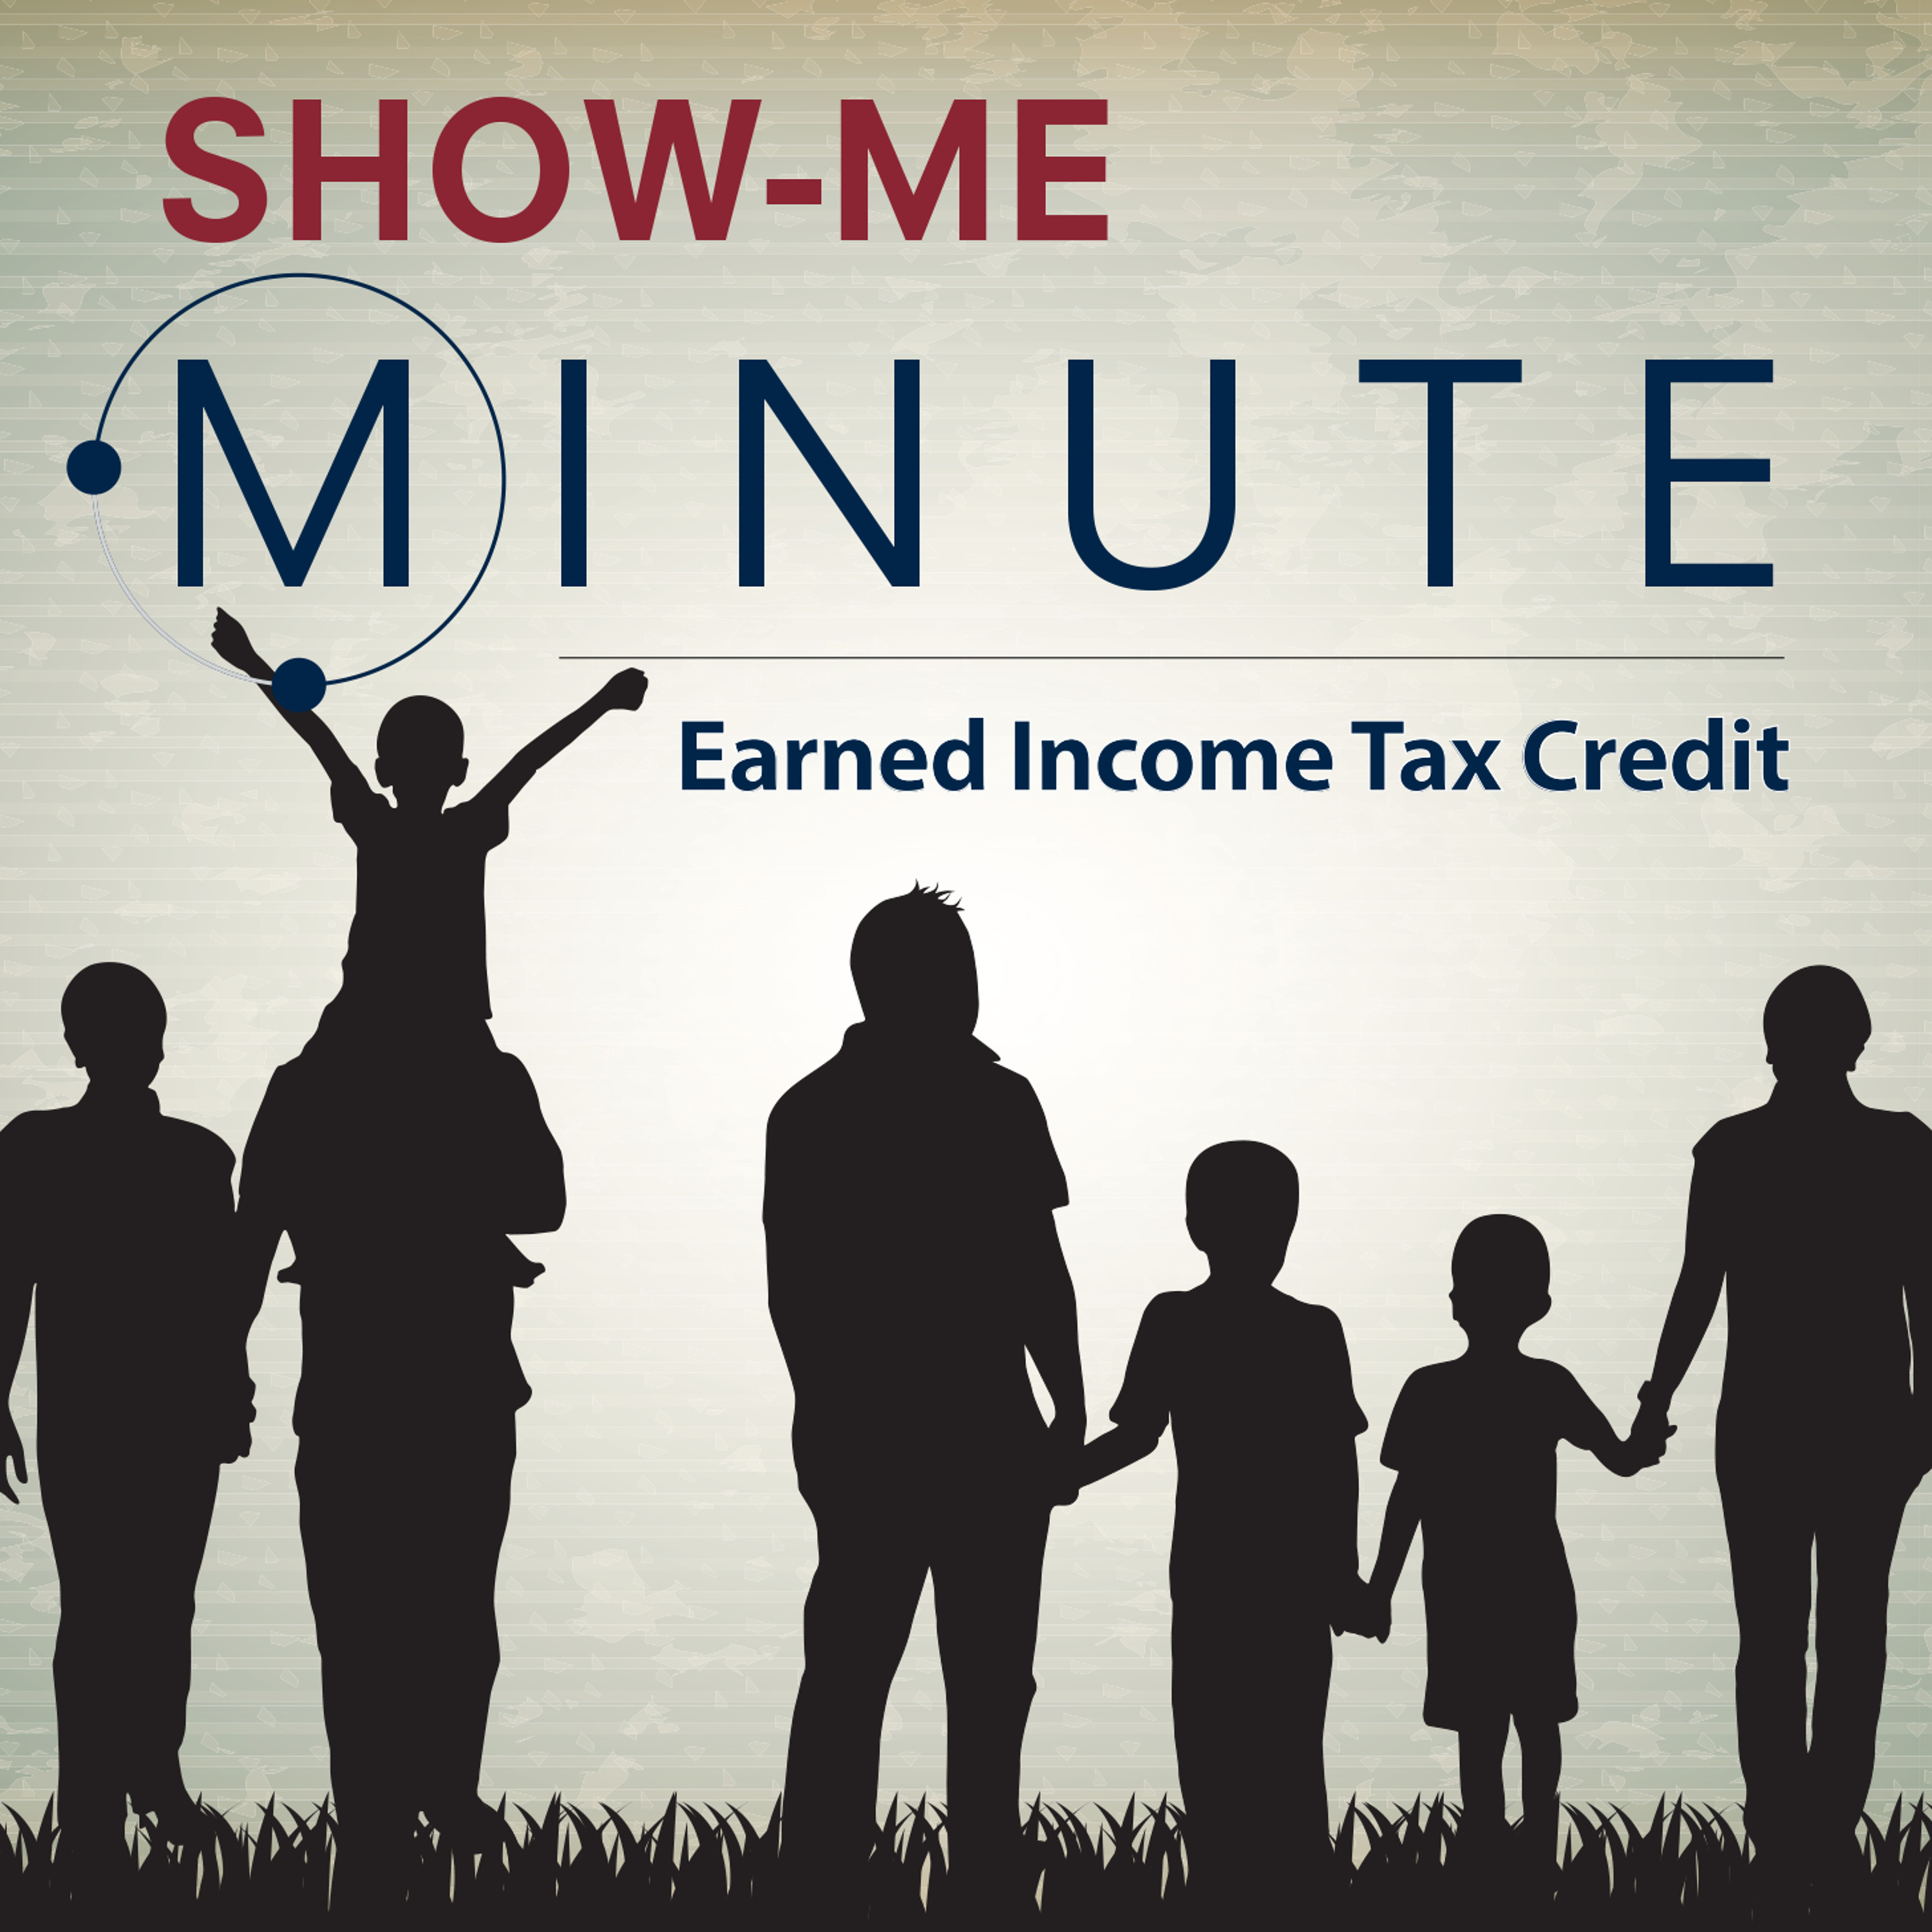 Show-Me Minute: Earned Income Tax Credit (EITC)